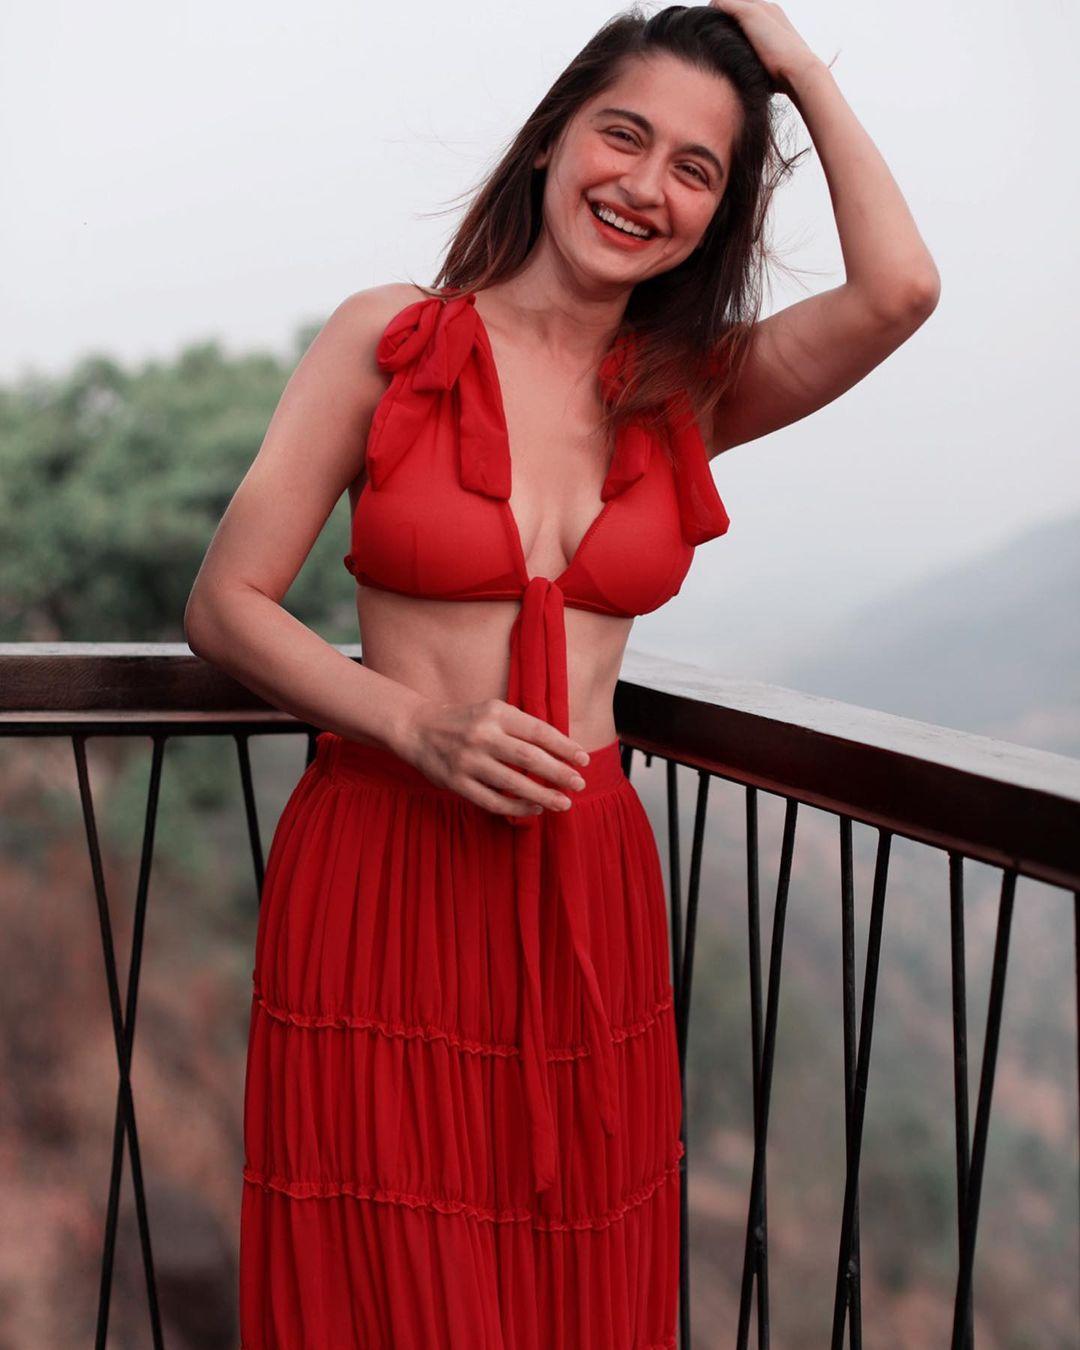 Indian television actress hot photos sanjeeda sheikh hot and sexy stills photos hd images pictures stills first look posters of indian television actress hot photos sanjeeda sheikh hot and sexy